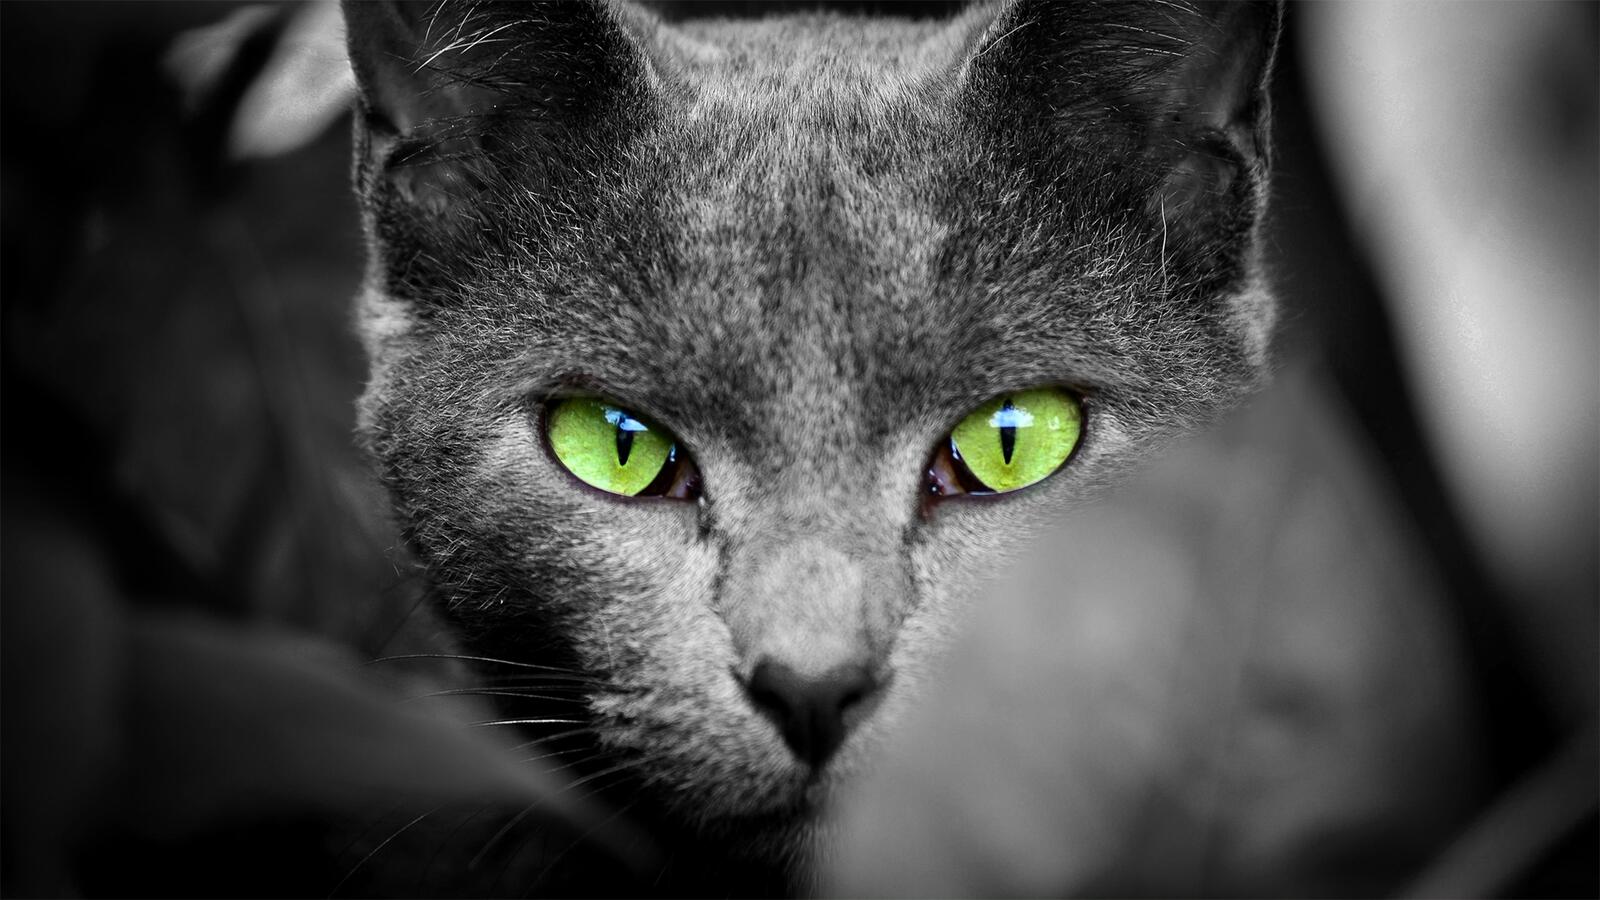 Free photo A cat with green eyes in a monochrome photo